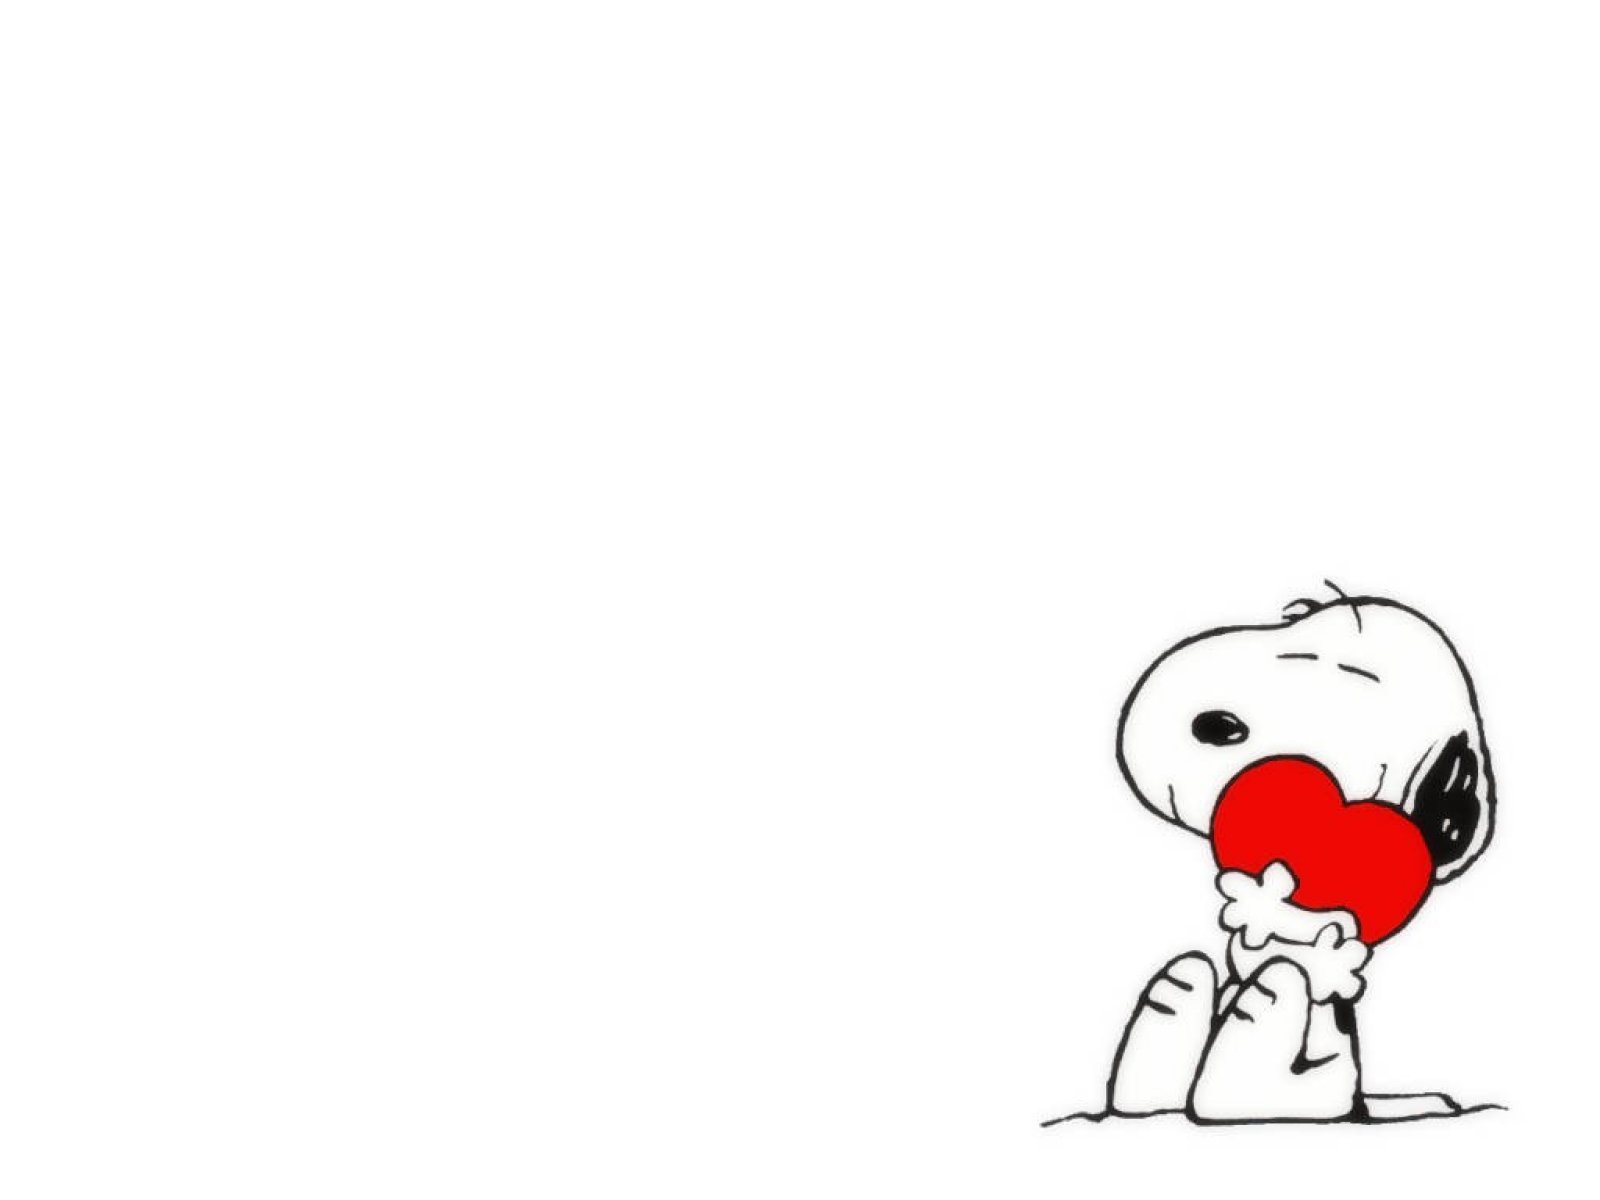 Free Download Snoopy 1600x10 Naver 1600x10 For Your Desktop Mobile Tablet Explore 50 Free Charlie Brown Valentine Wallpaper Charlie Brown Spring Wallpaper Charlie Brown Wallpaper And Screensaver Free Charlie